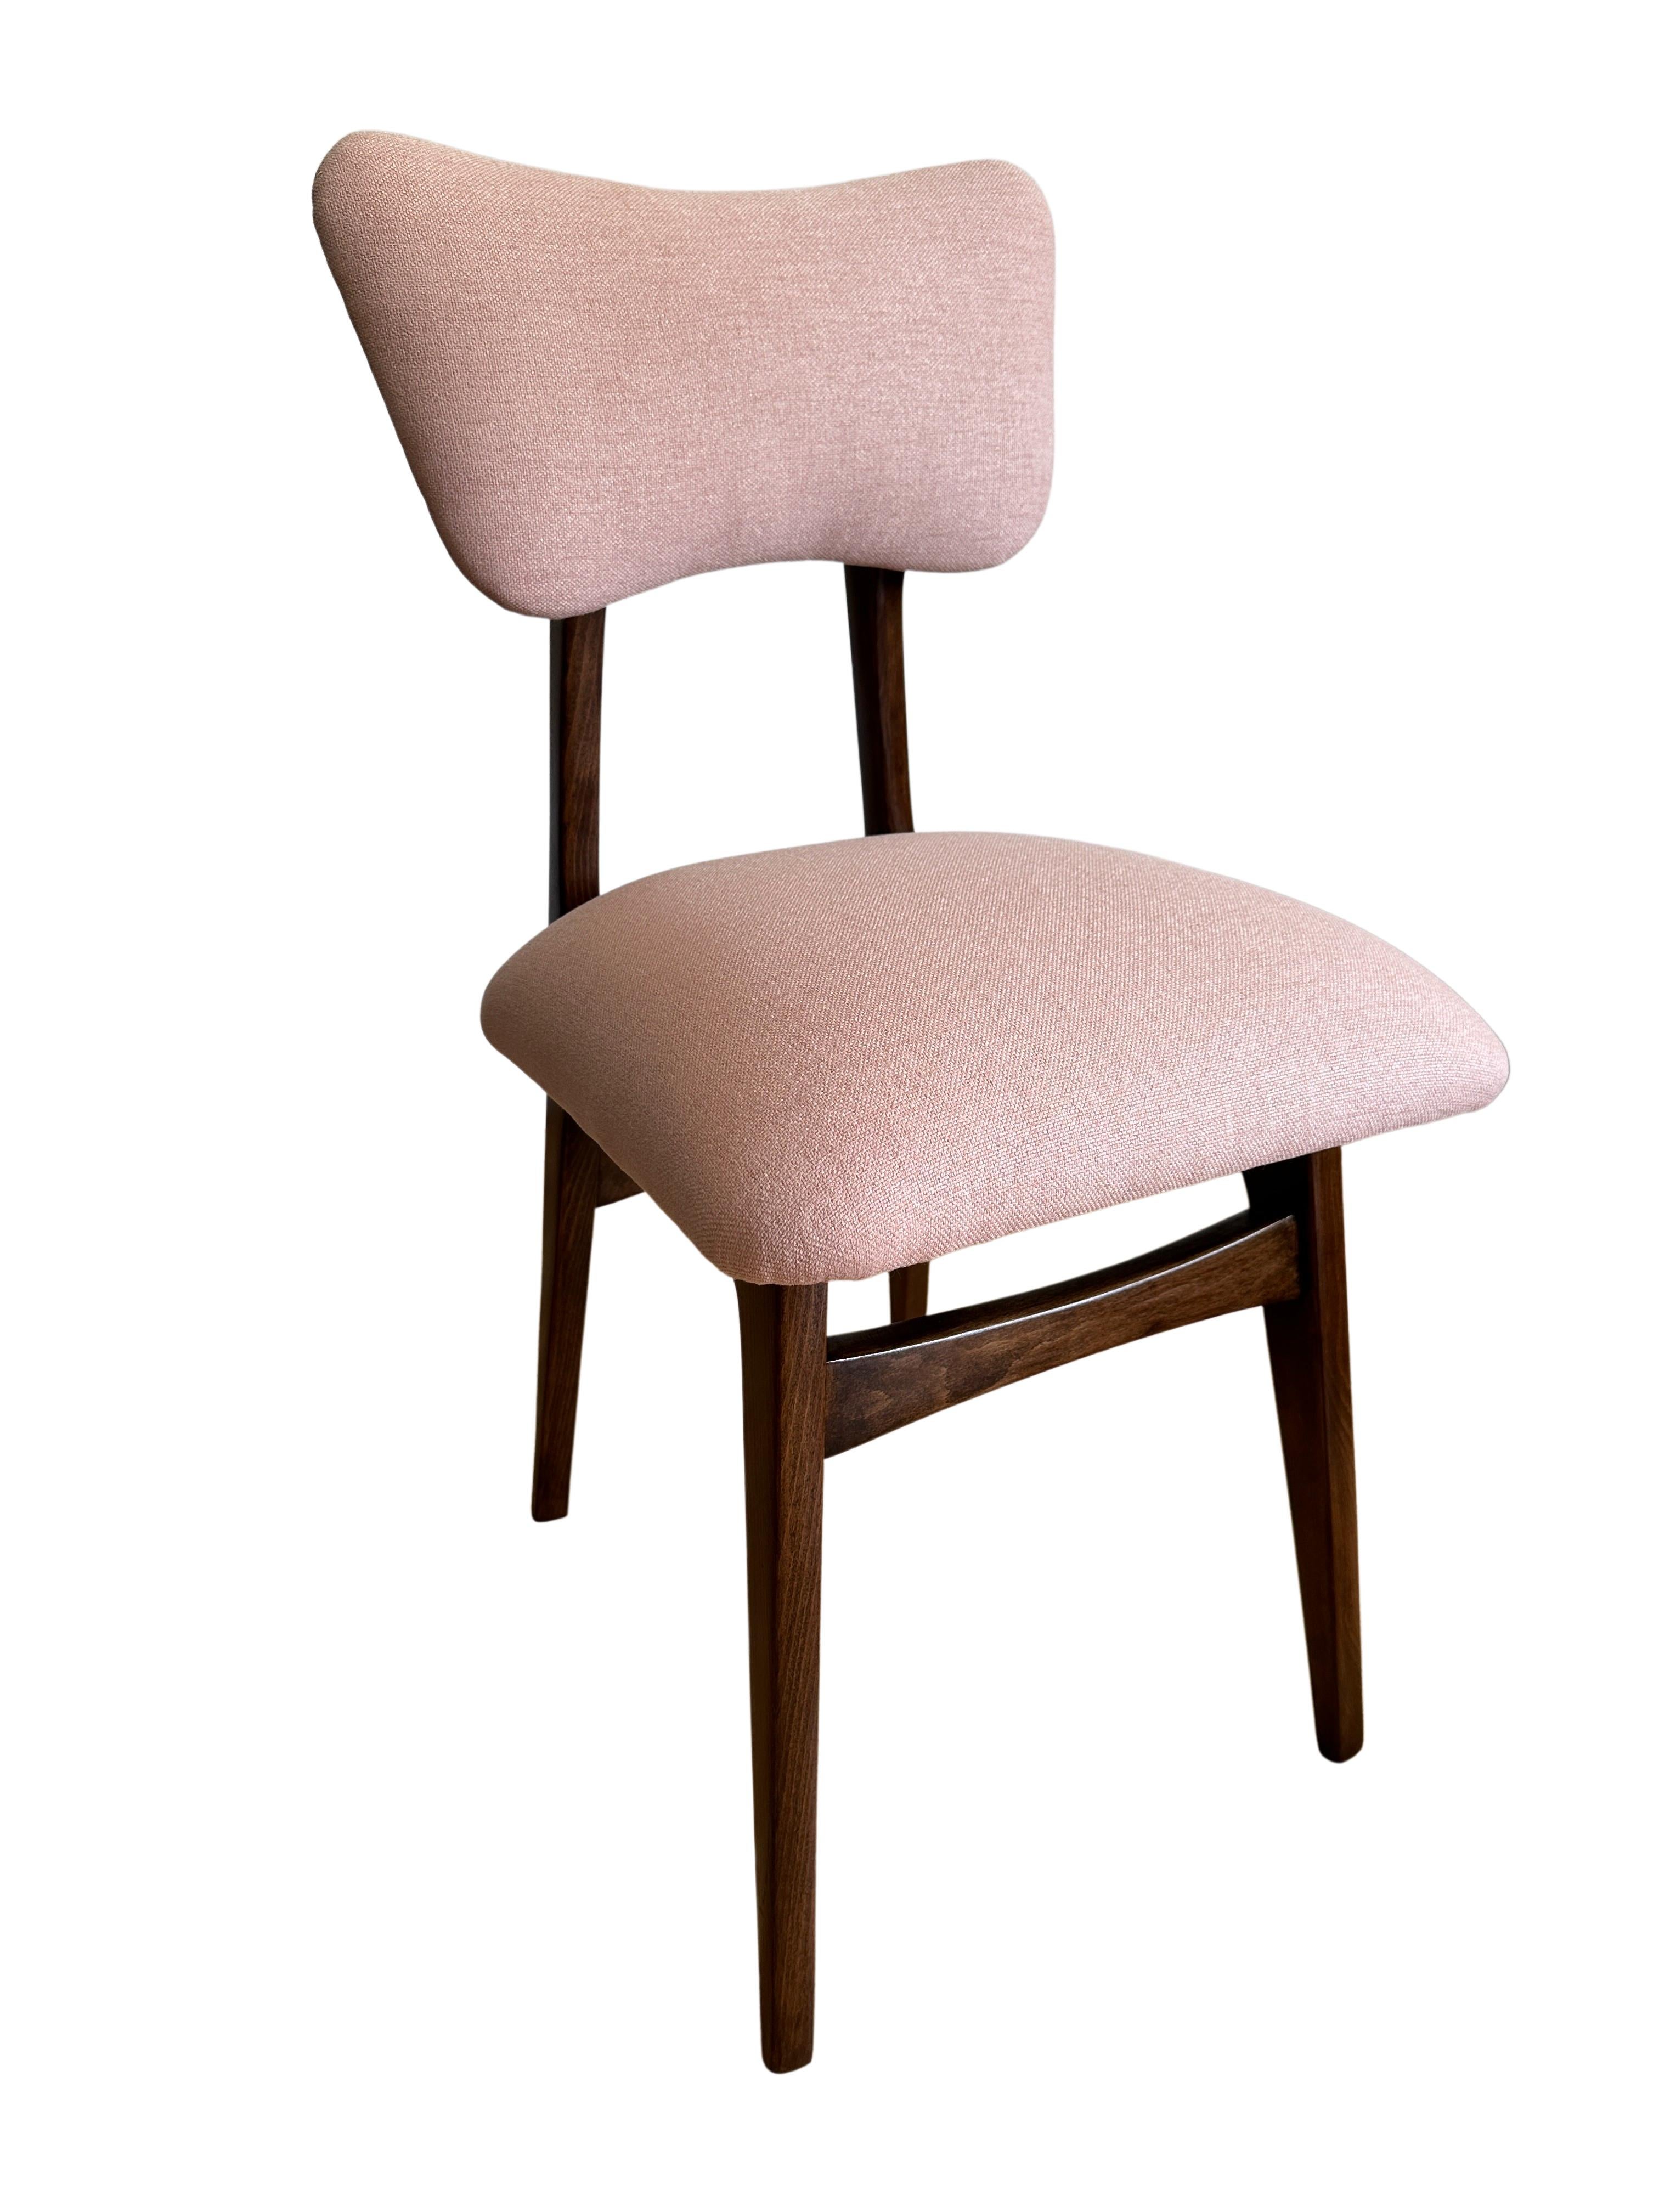 Set of 2 Midcentury Light Pink Dining Chairs, Europe, 1960s For Sale 2